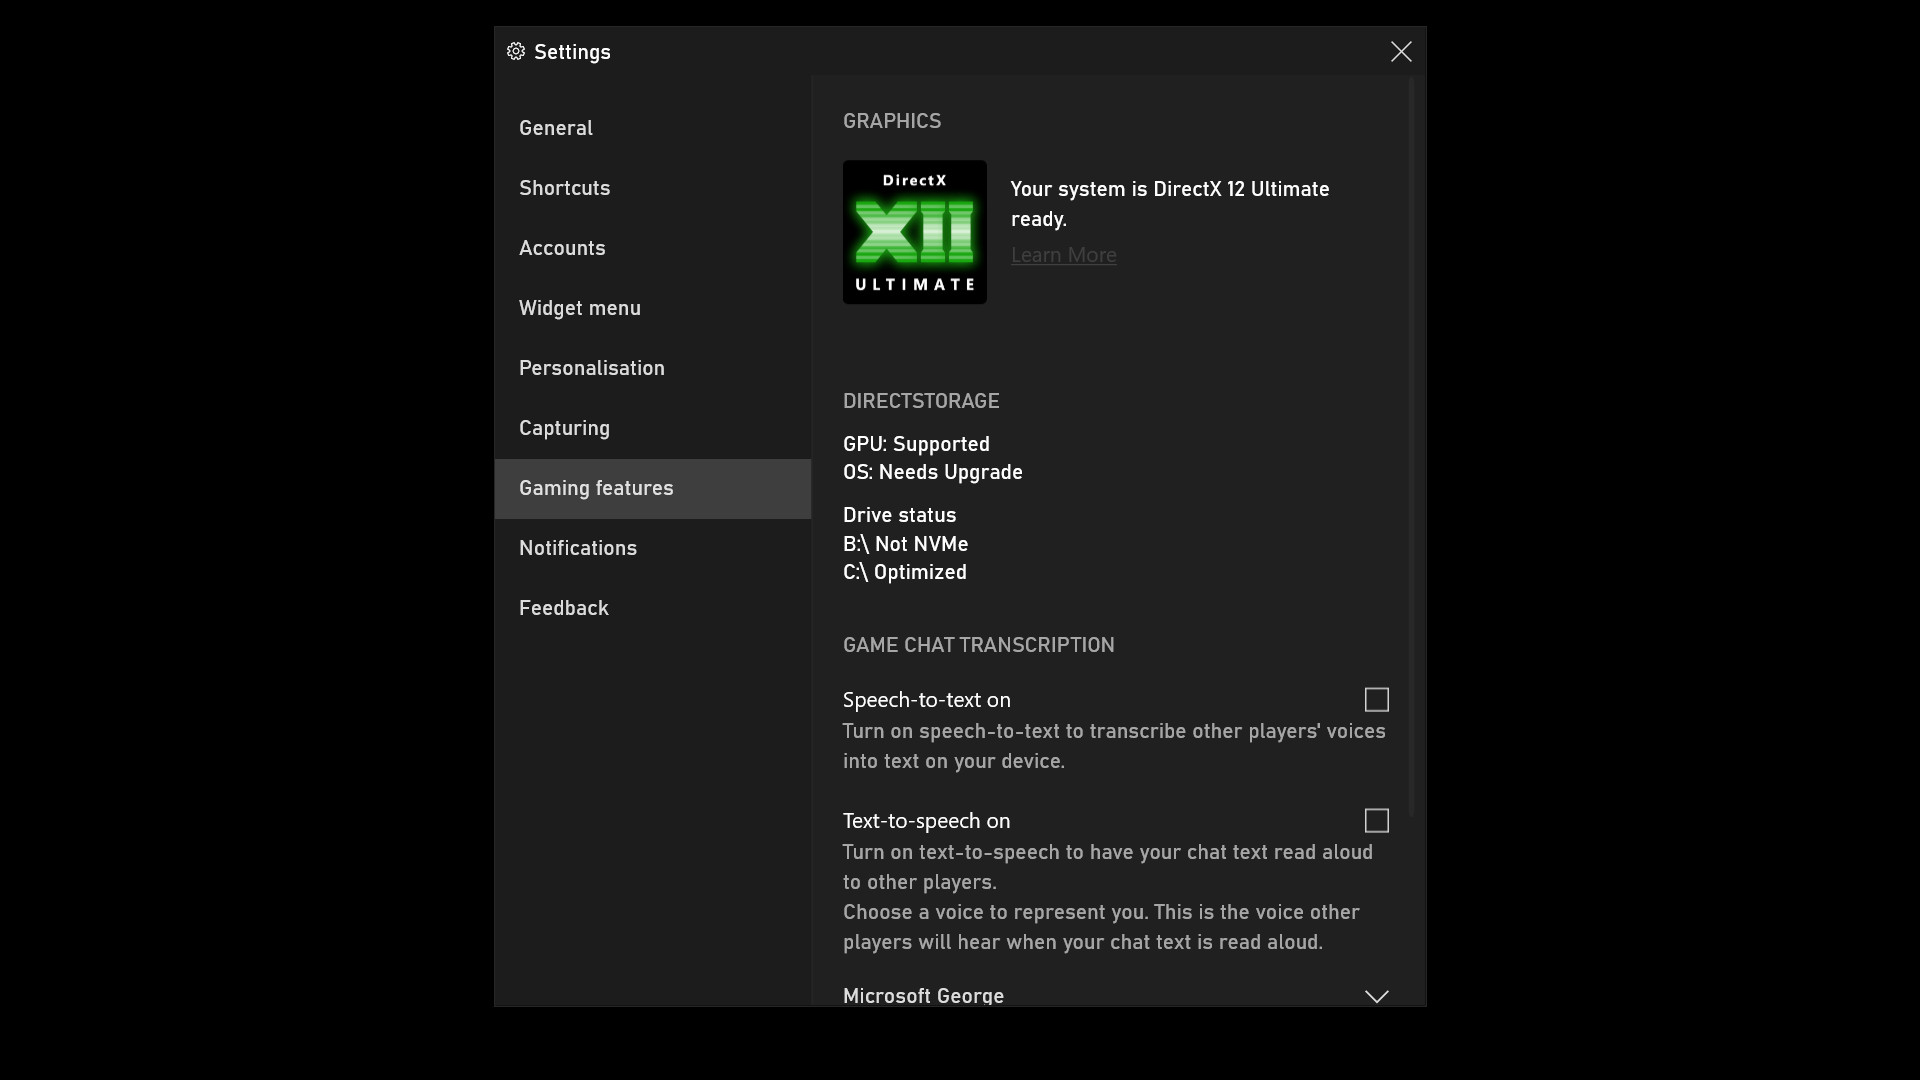 A screengrab of the updated Xbox Game Bar displaying system requirements